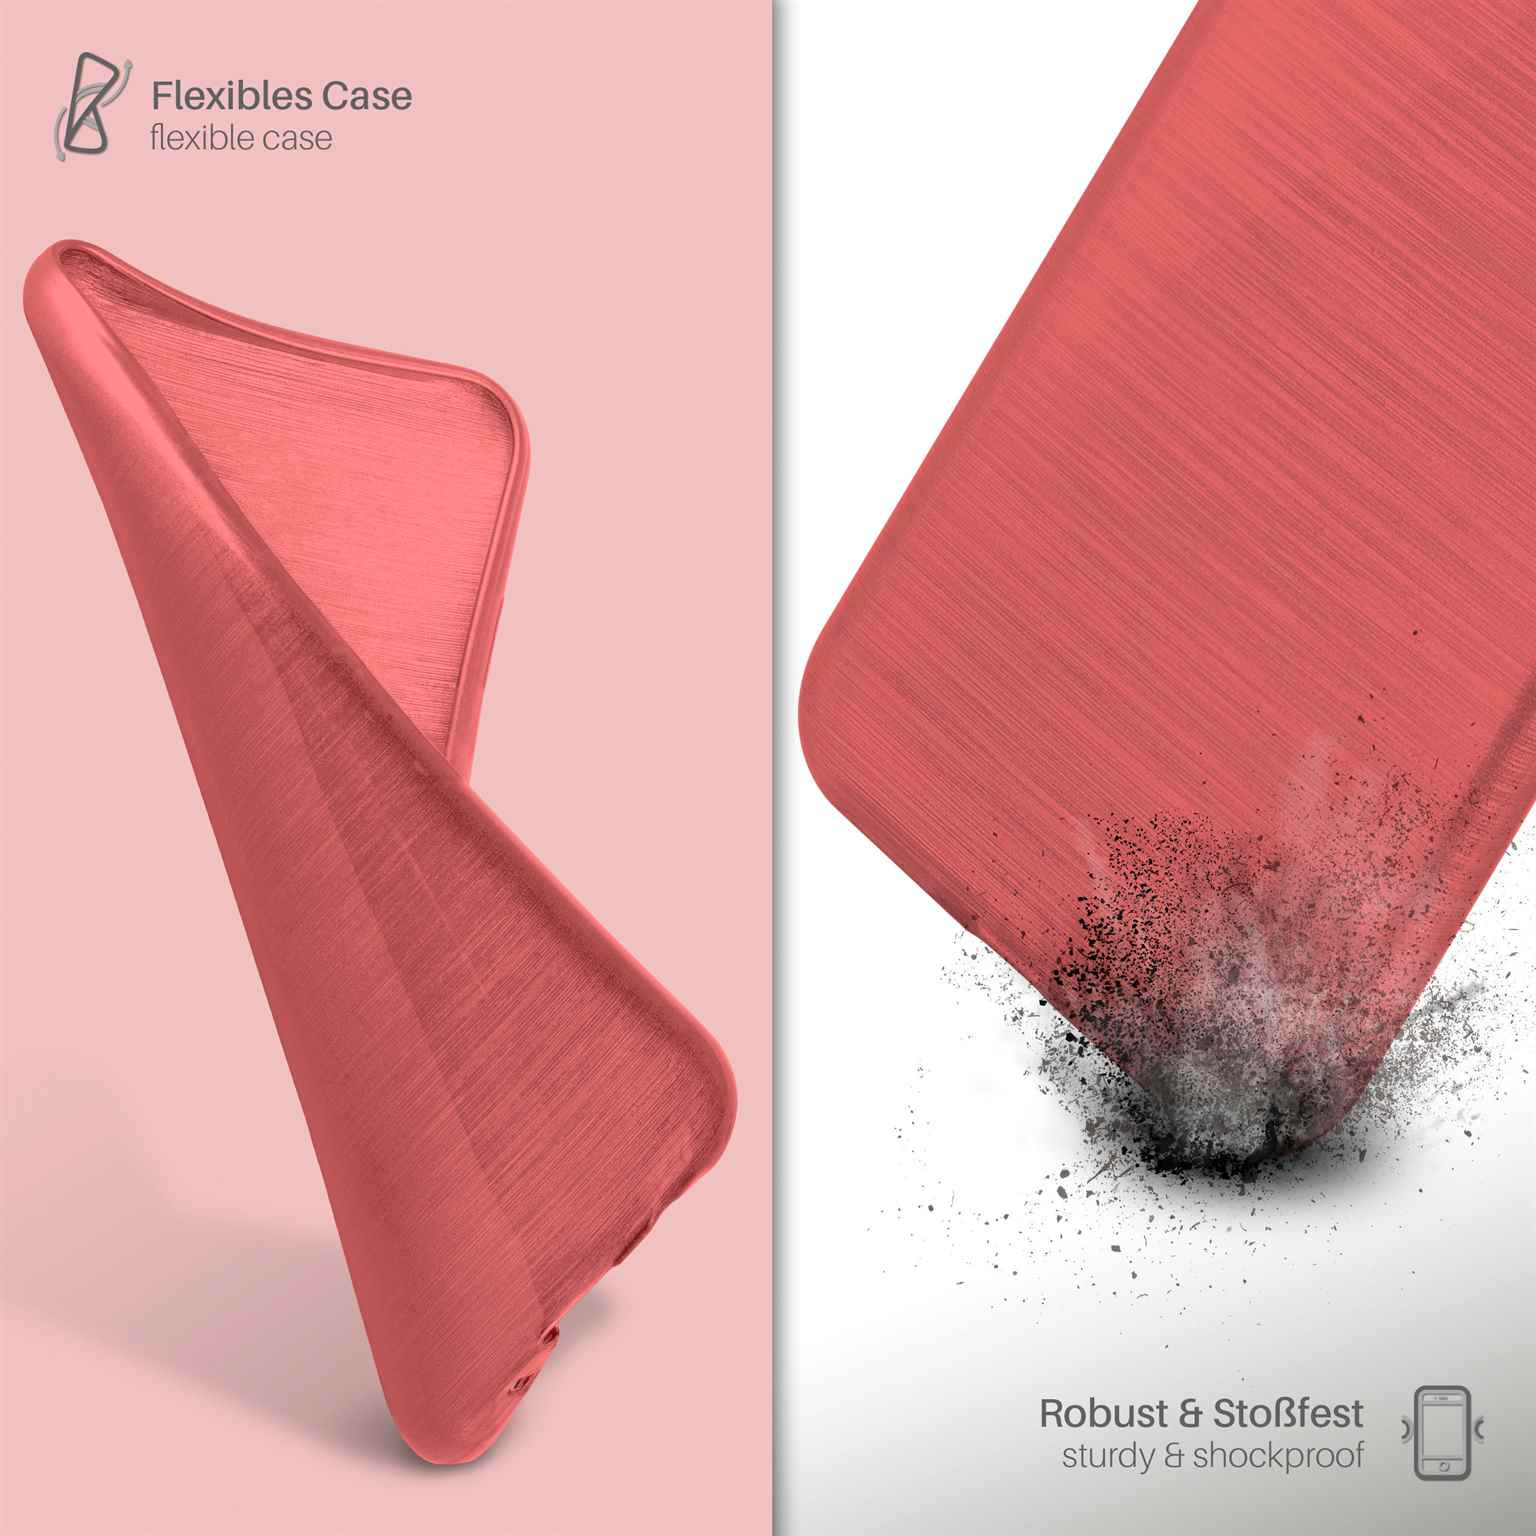 Backcover, S8, Brushed Galaxy MOEX Coral-Red Samsung, Case,